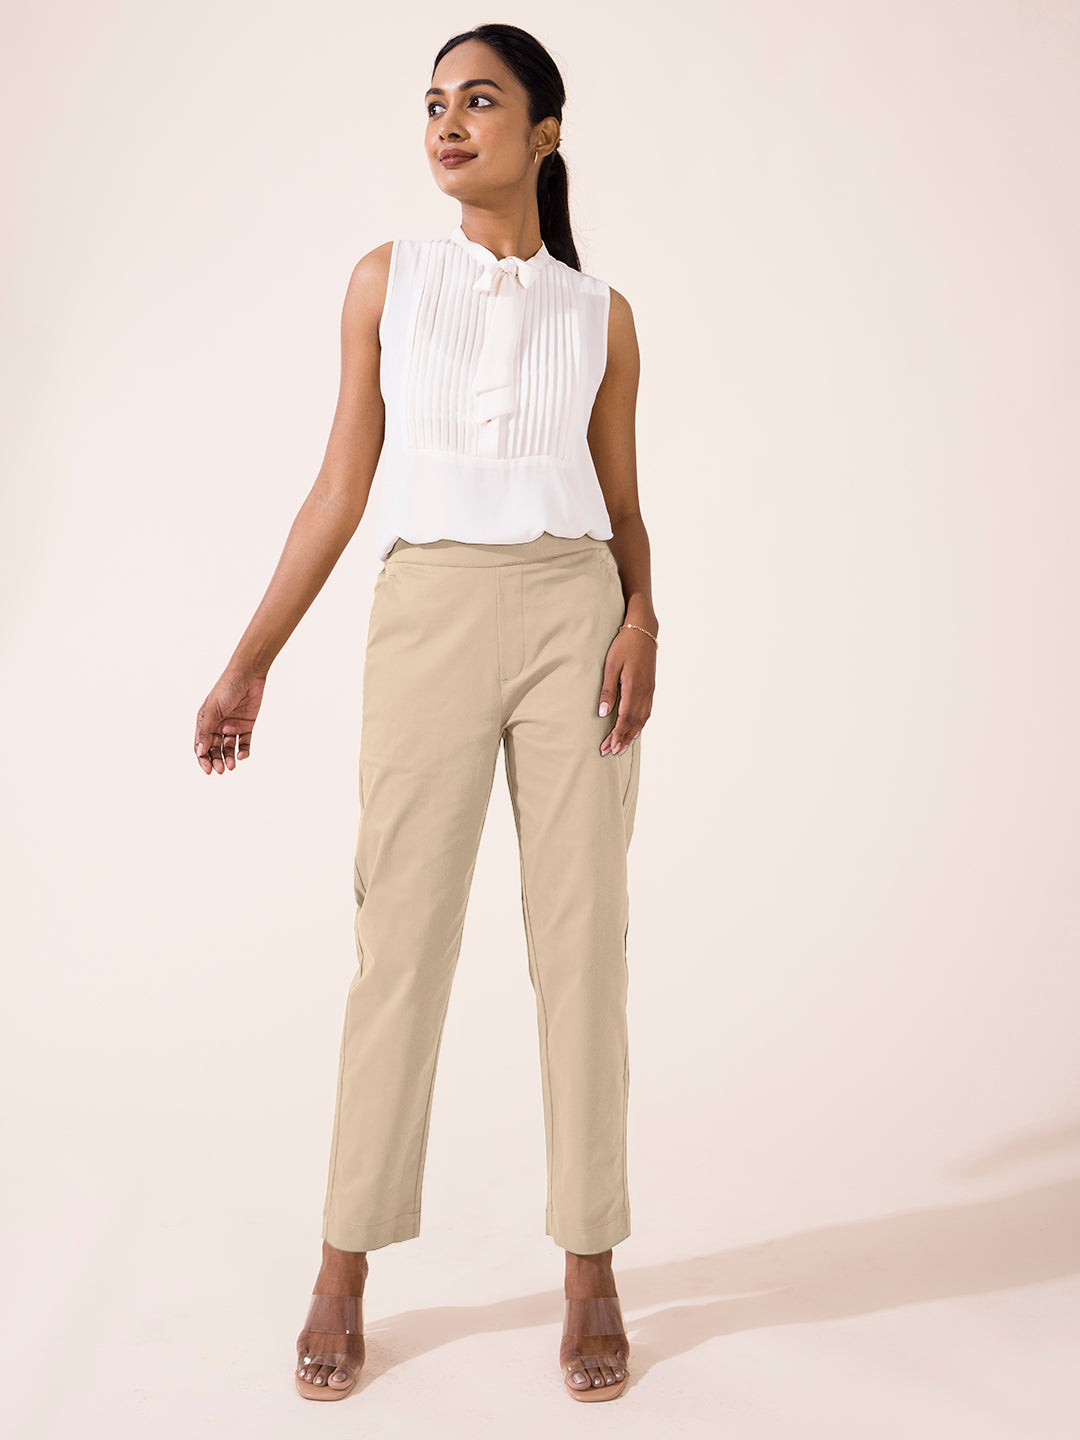 Buy Go Colors Women Light Beige Chinos Trousers online